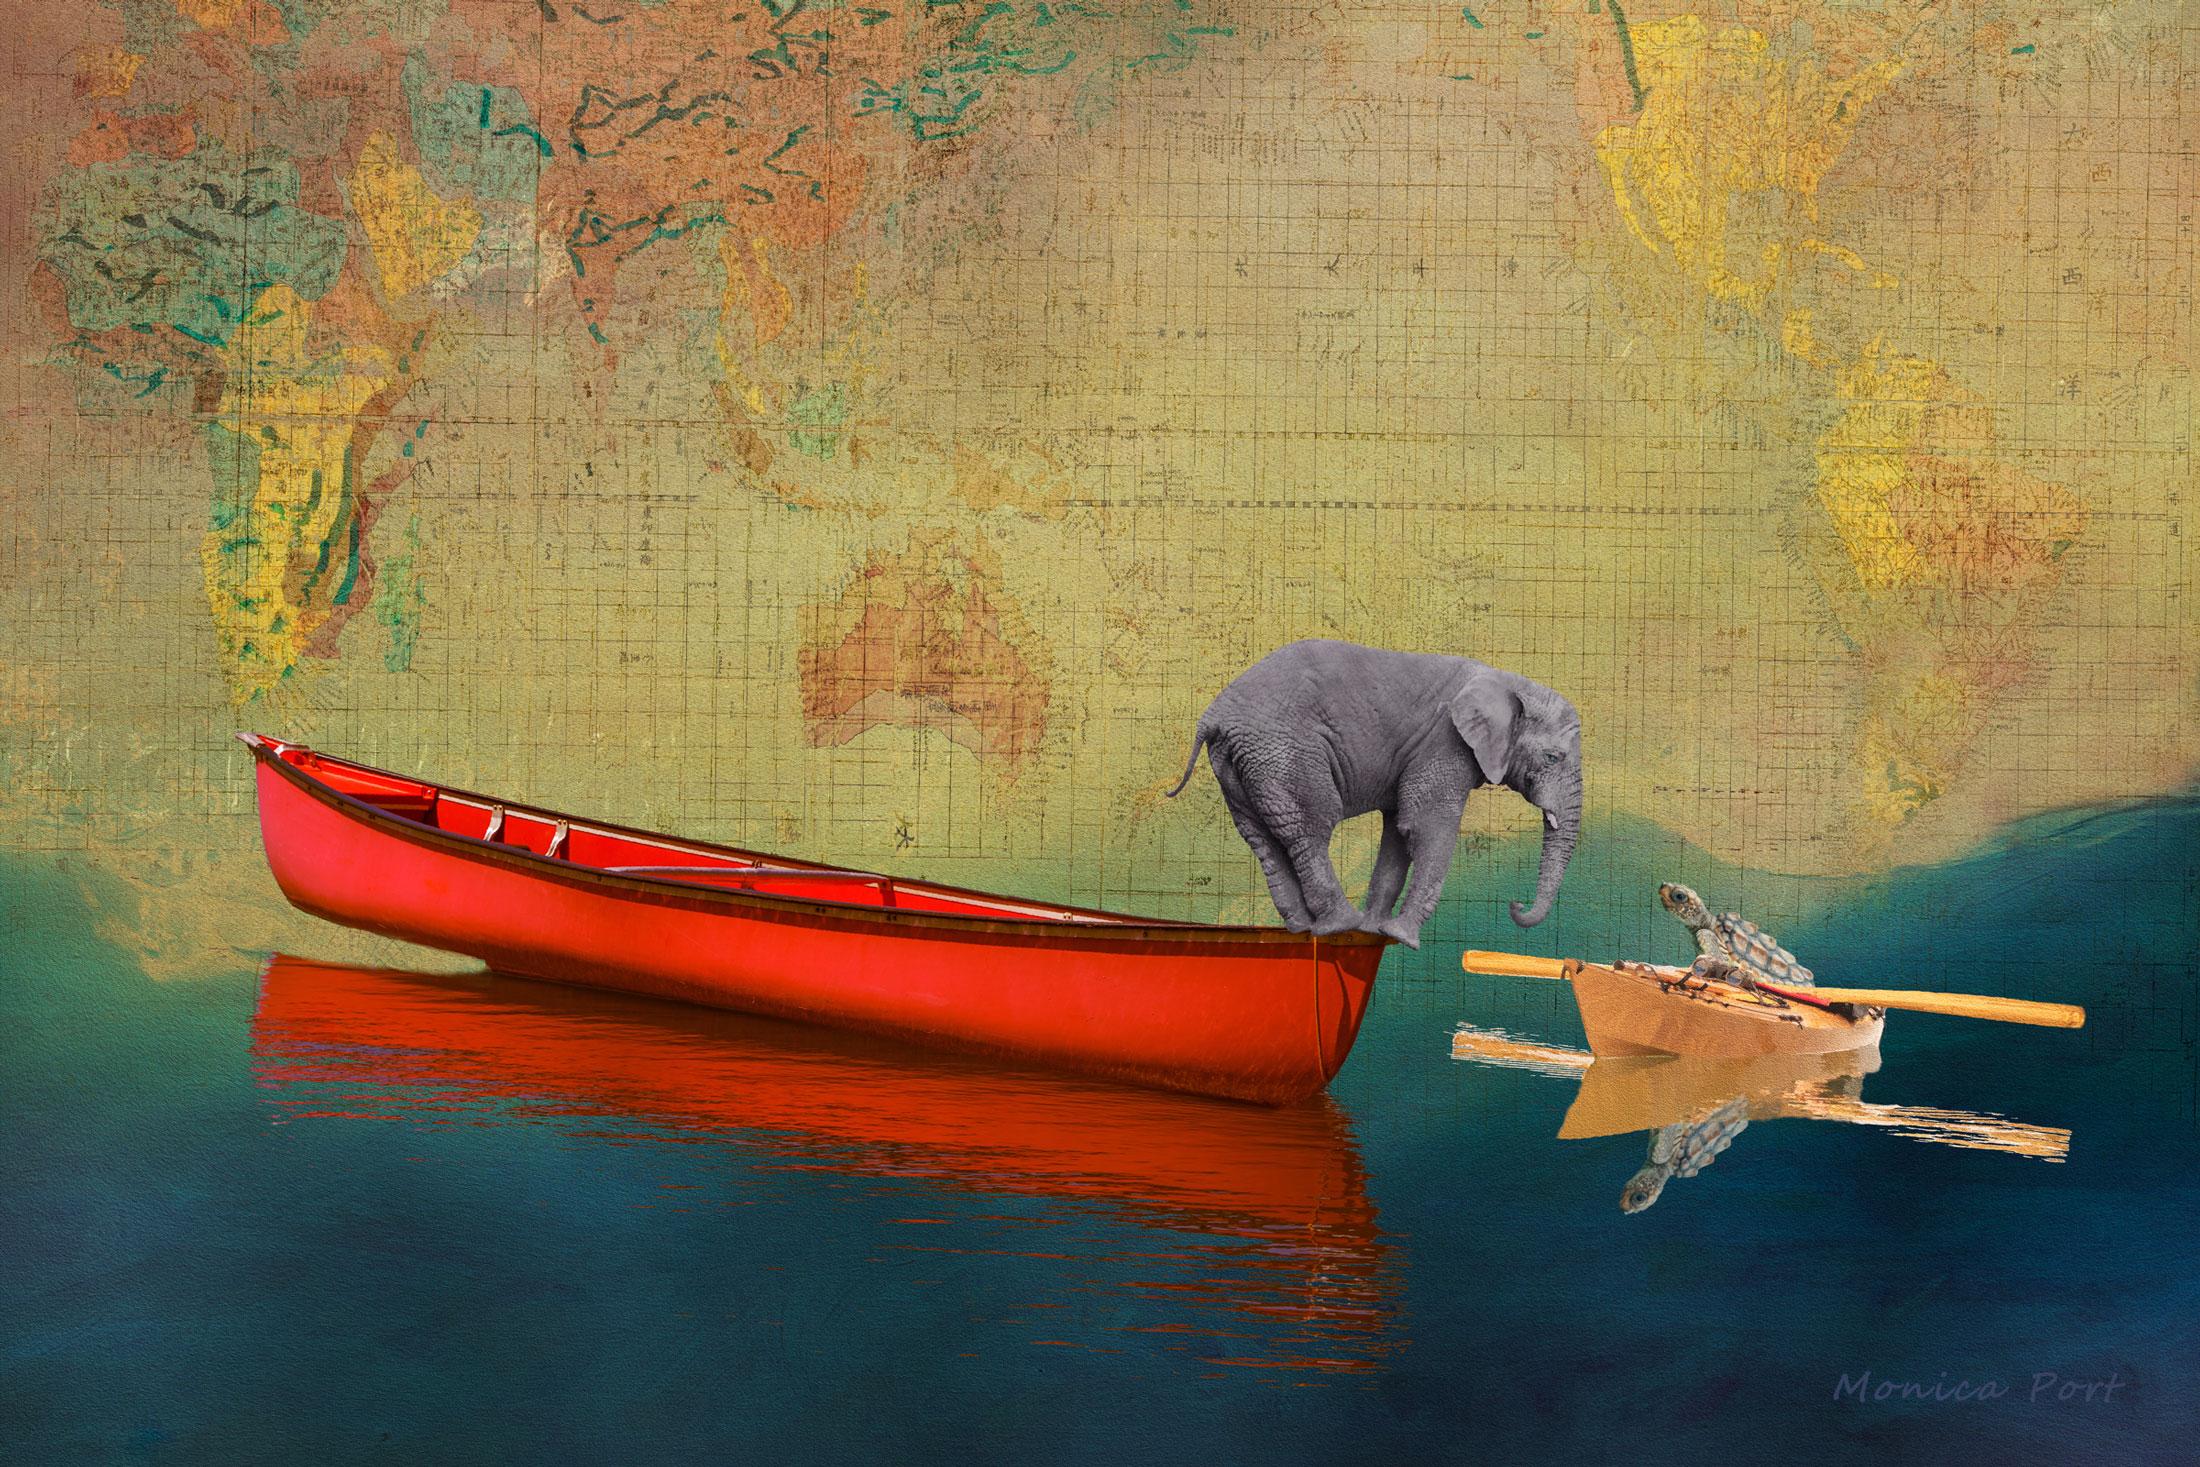 Elephant and Turtle in Canoes (by Monica Port)